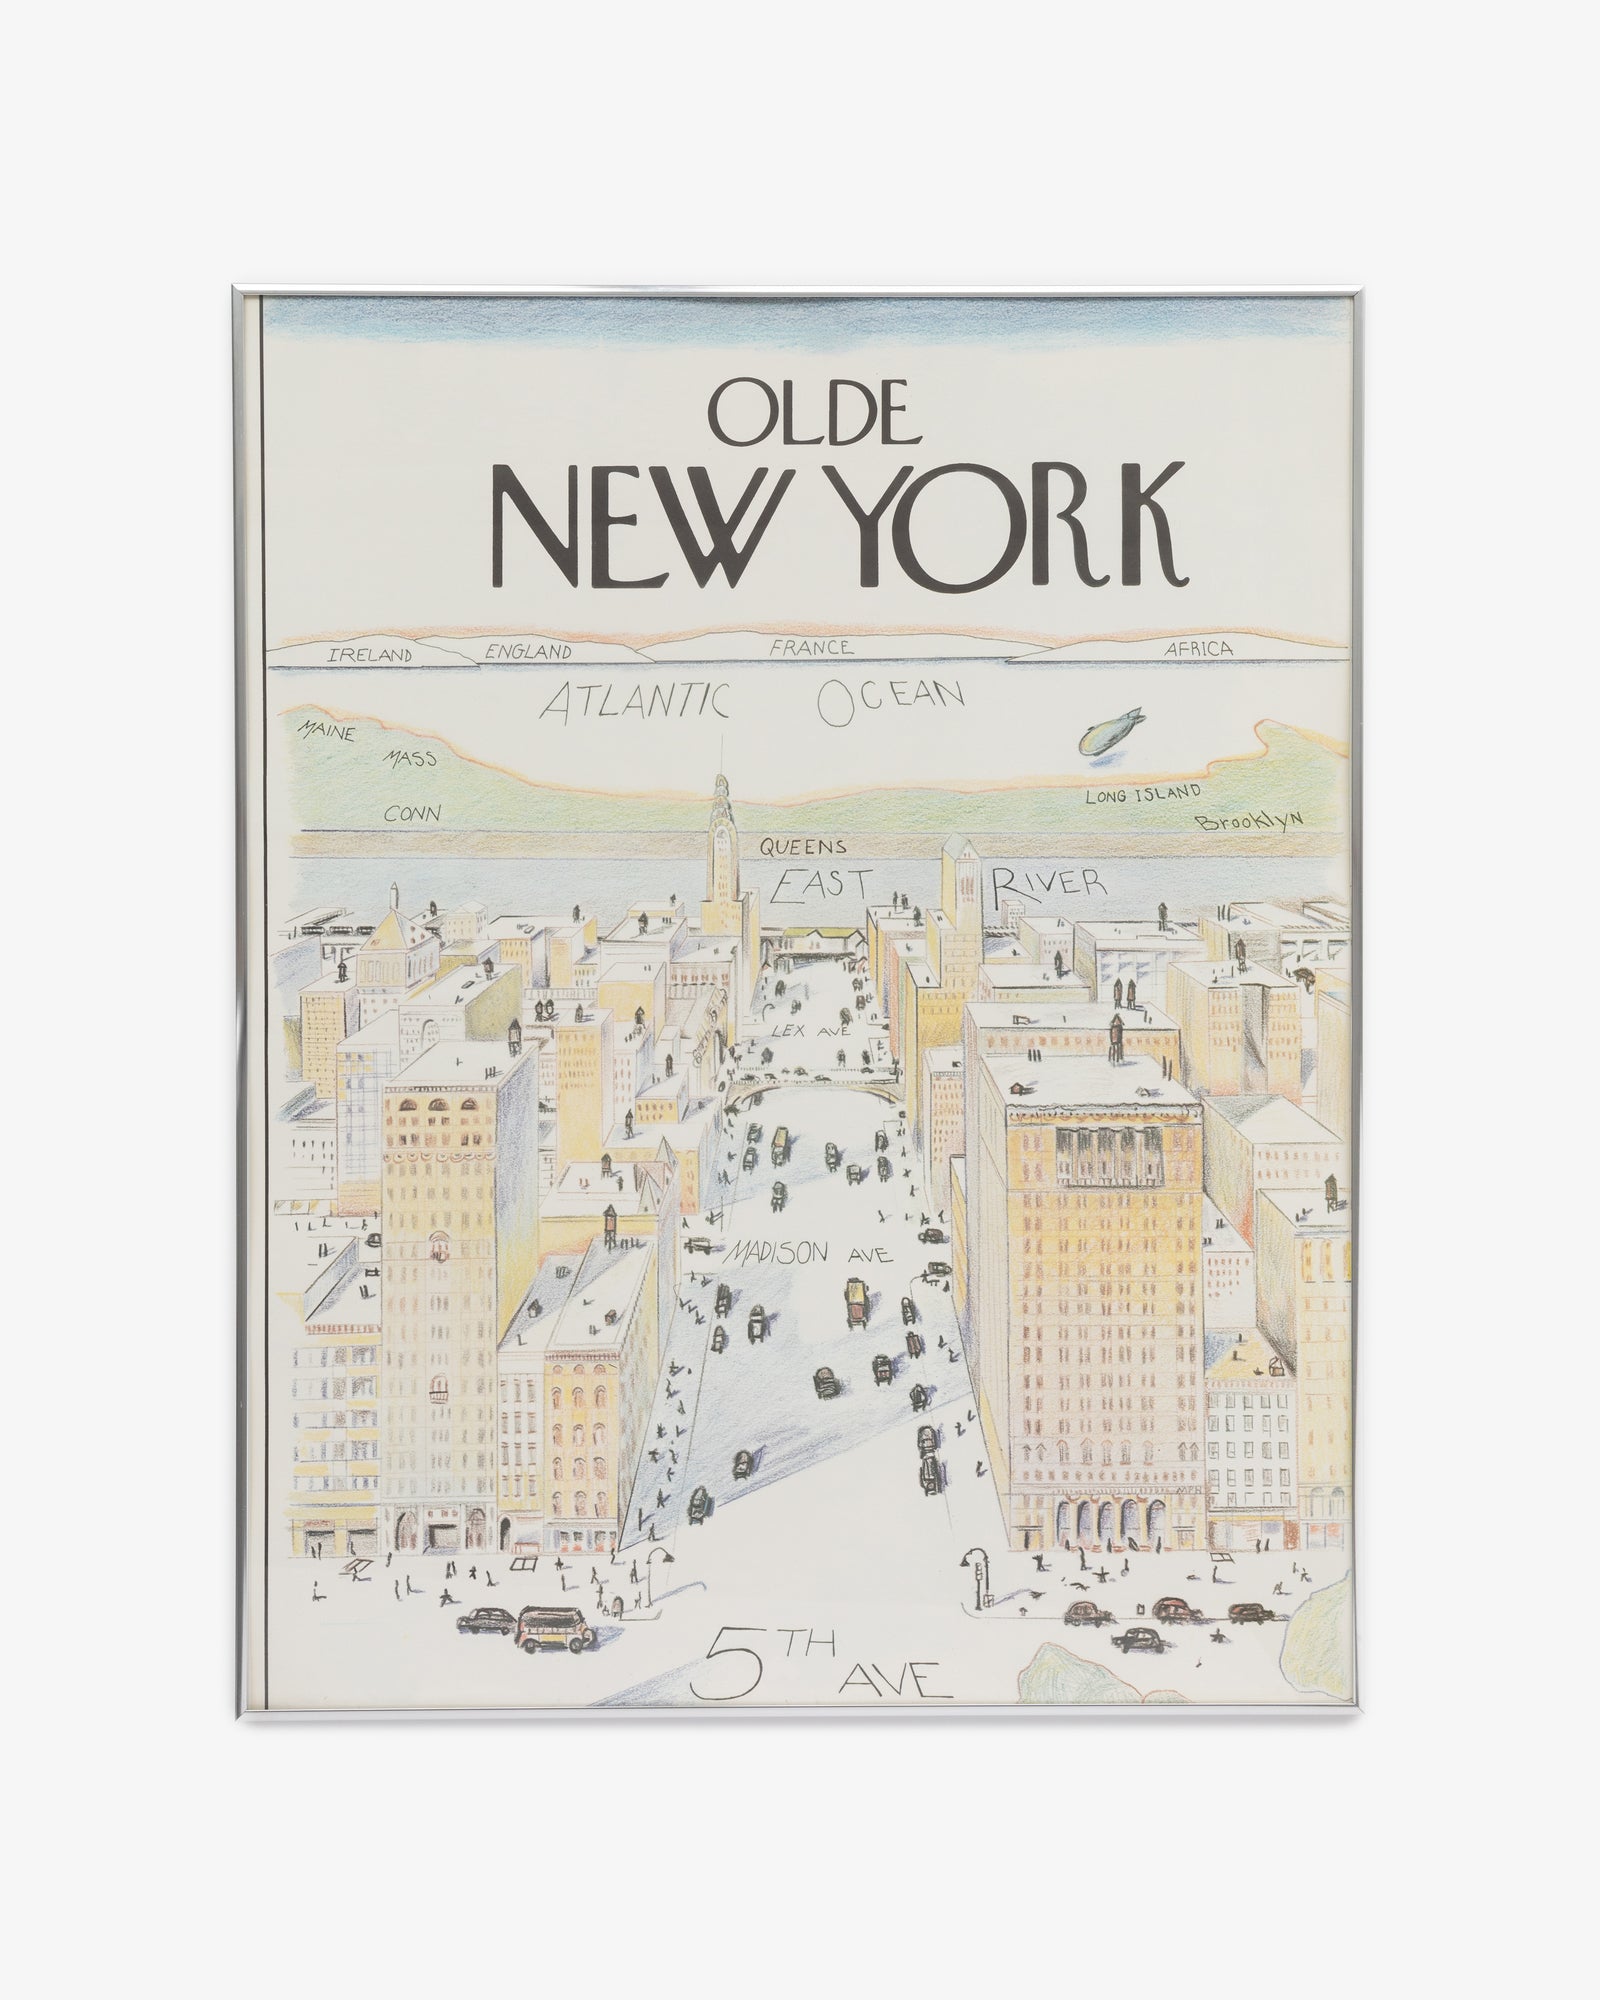 Original "Olde New York A View From 5th Avenue" Poster